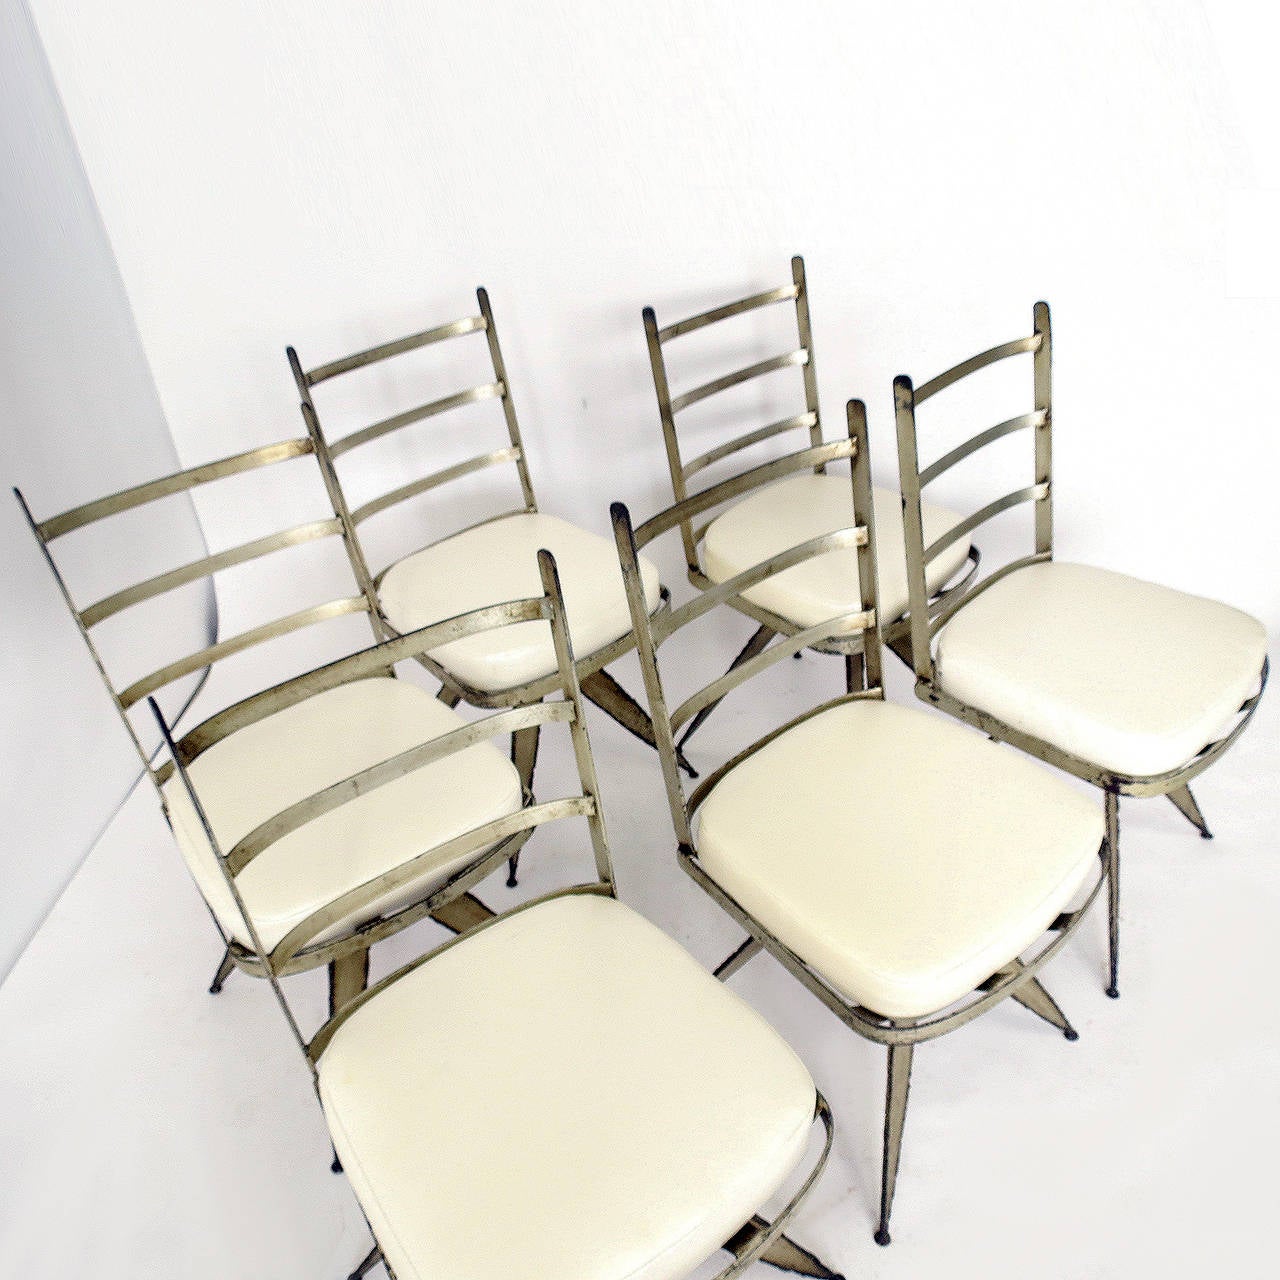 Stunning set of six dining chairs that swivel. Torch cut metal is silver leafed and has some age and patina. Seat cushions are upholstered in off-white vinyl. Could be use indoors or outside in a covered area.